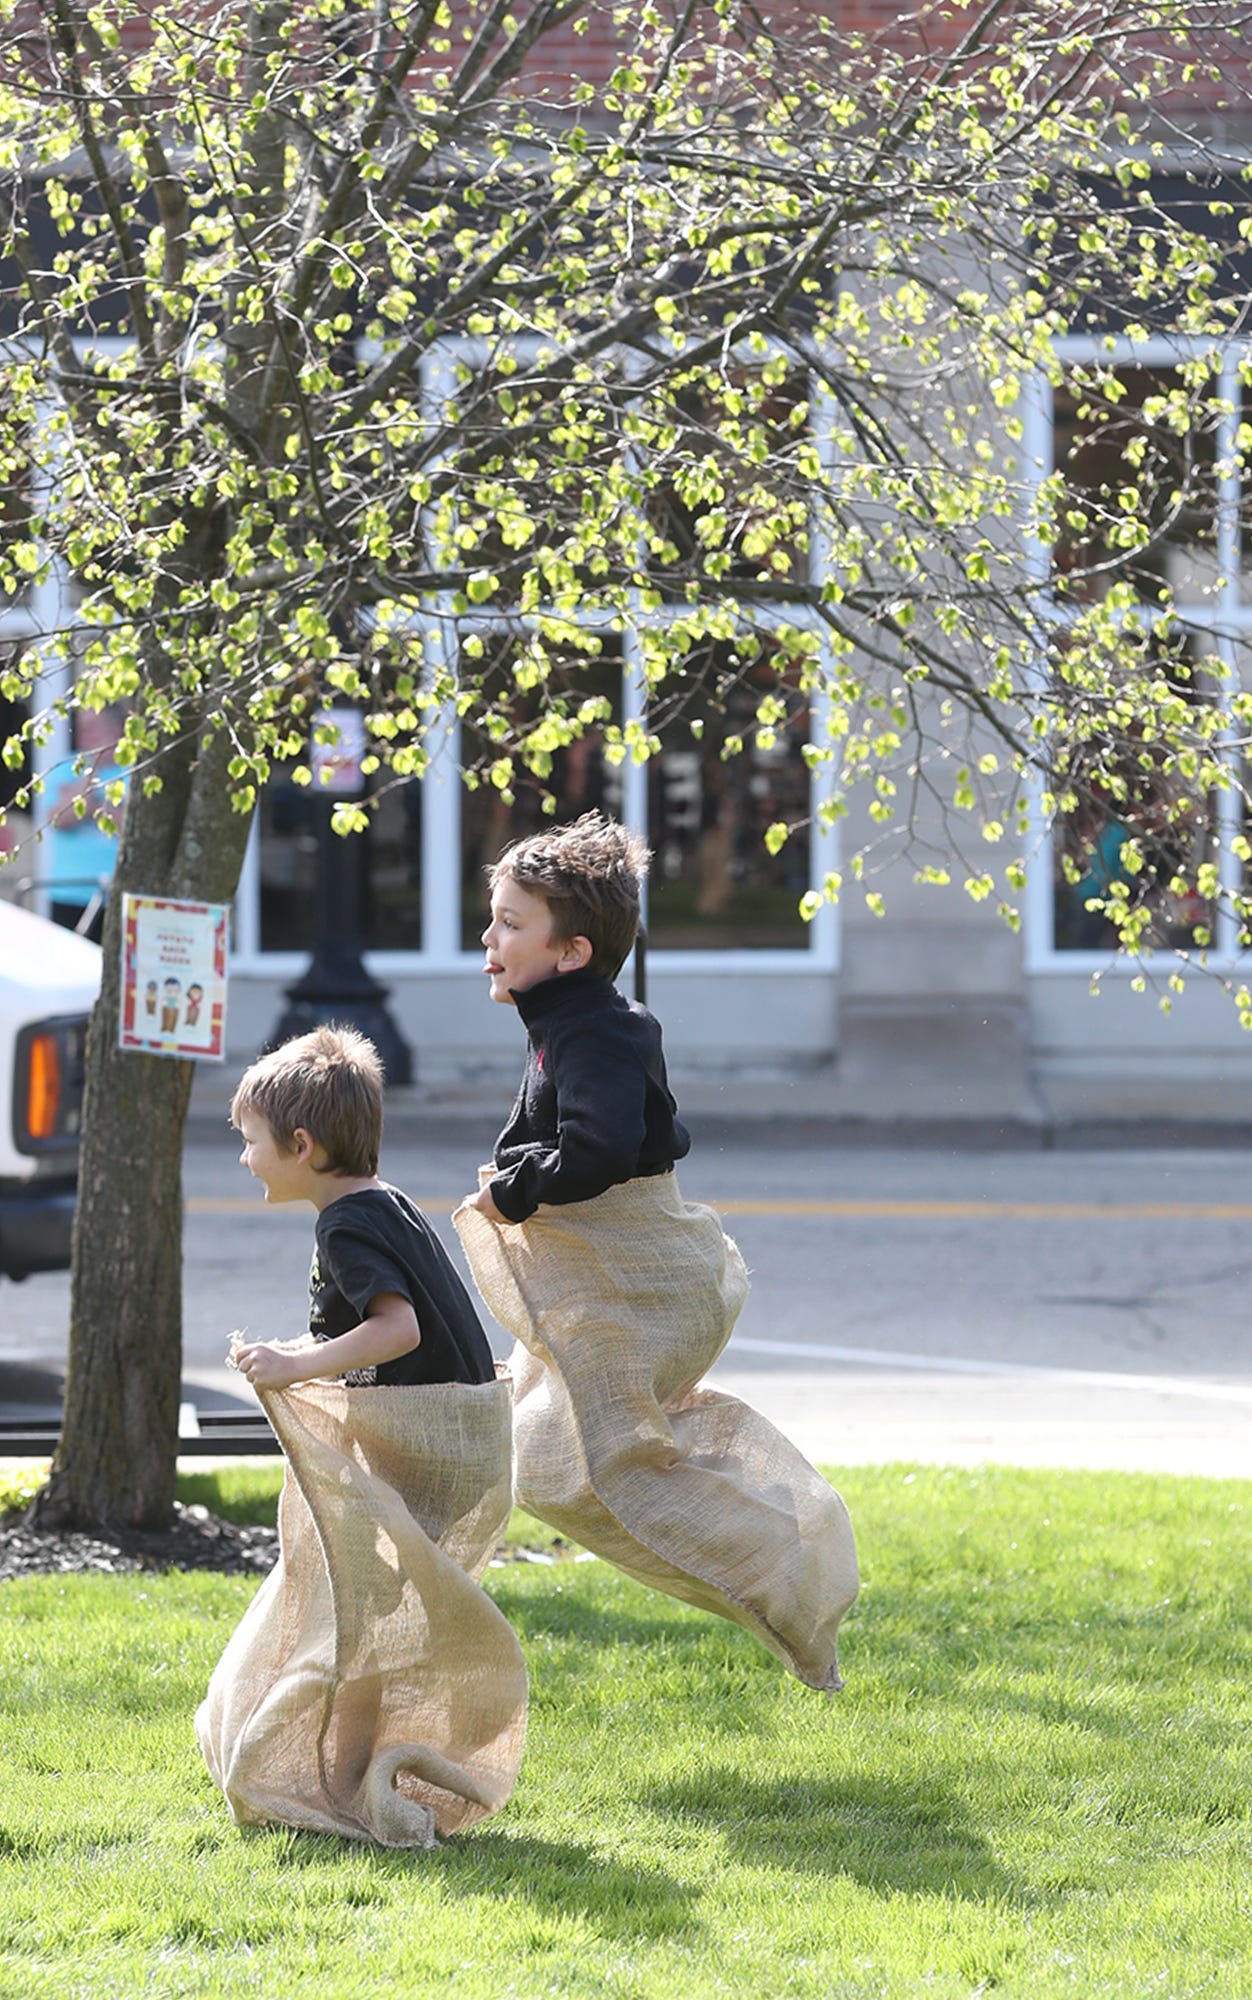 Jackson Lloyd, 4 and his brother Quentin, 6 take part in a potato sack race at the Ravenna JoJo Fest on Friday, April 26, 2024 in Ravenna.